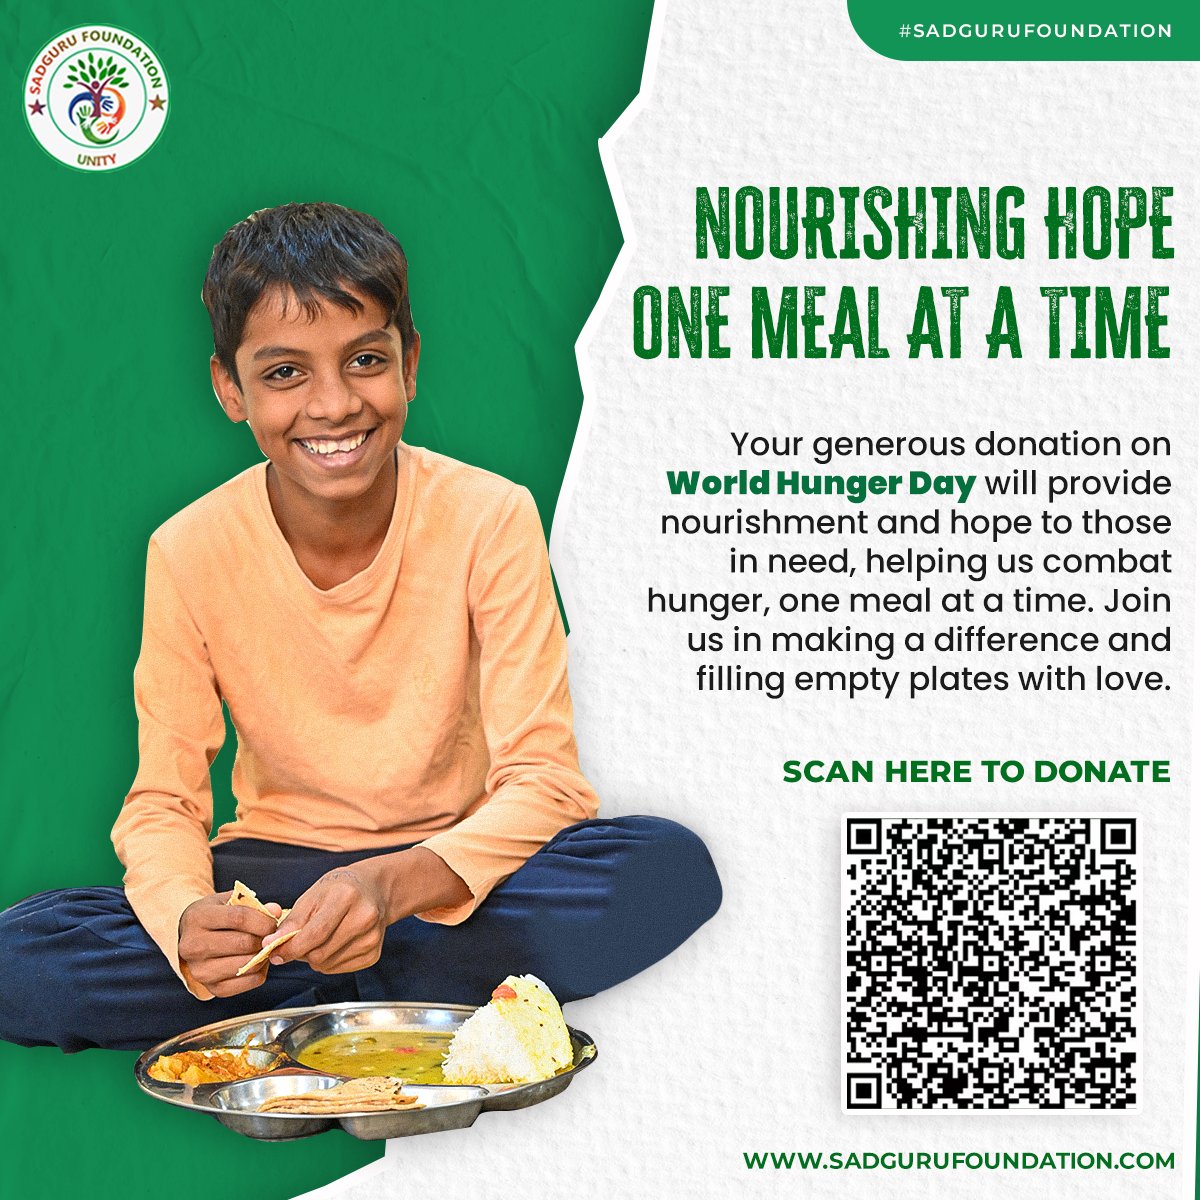 On this World Hunger Day, let us reach out to those in need, providing nourishment, support, and hope through our open hearts.
.
.
#sadgurufoundation #empowerment #dignitymatters  #feedthehungry #changelives #helpneeded #impactinglives #donate #helpthoseinneed #charitydonation